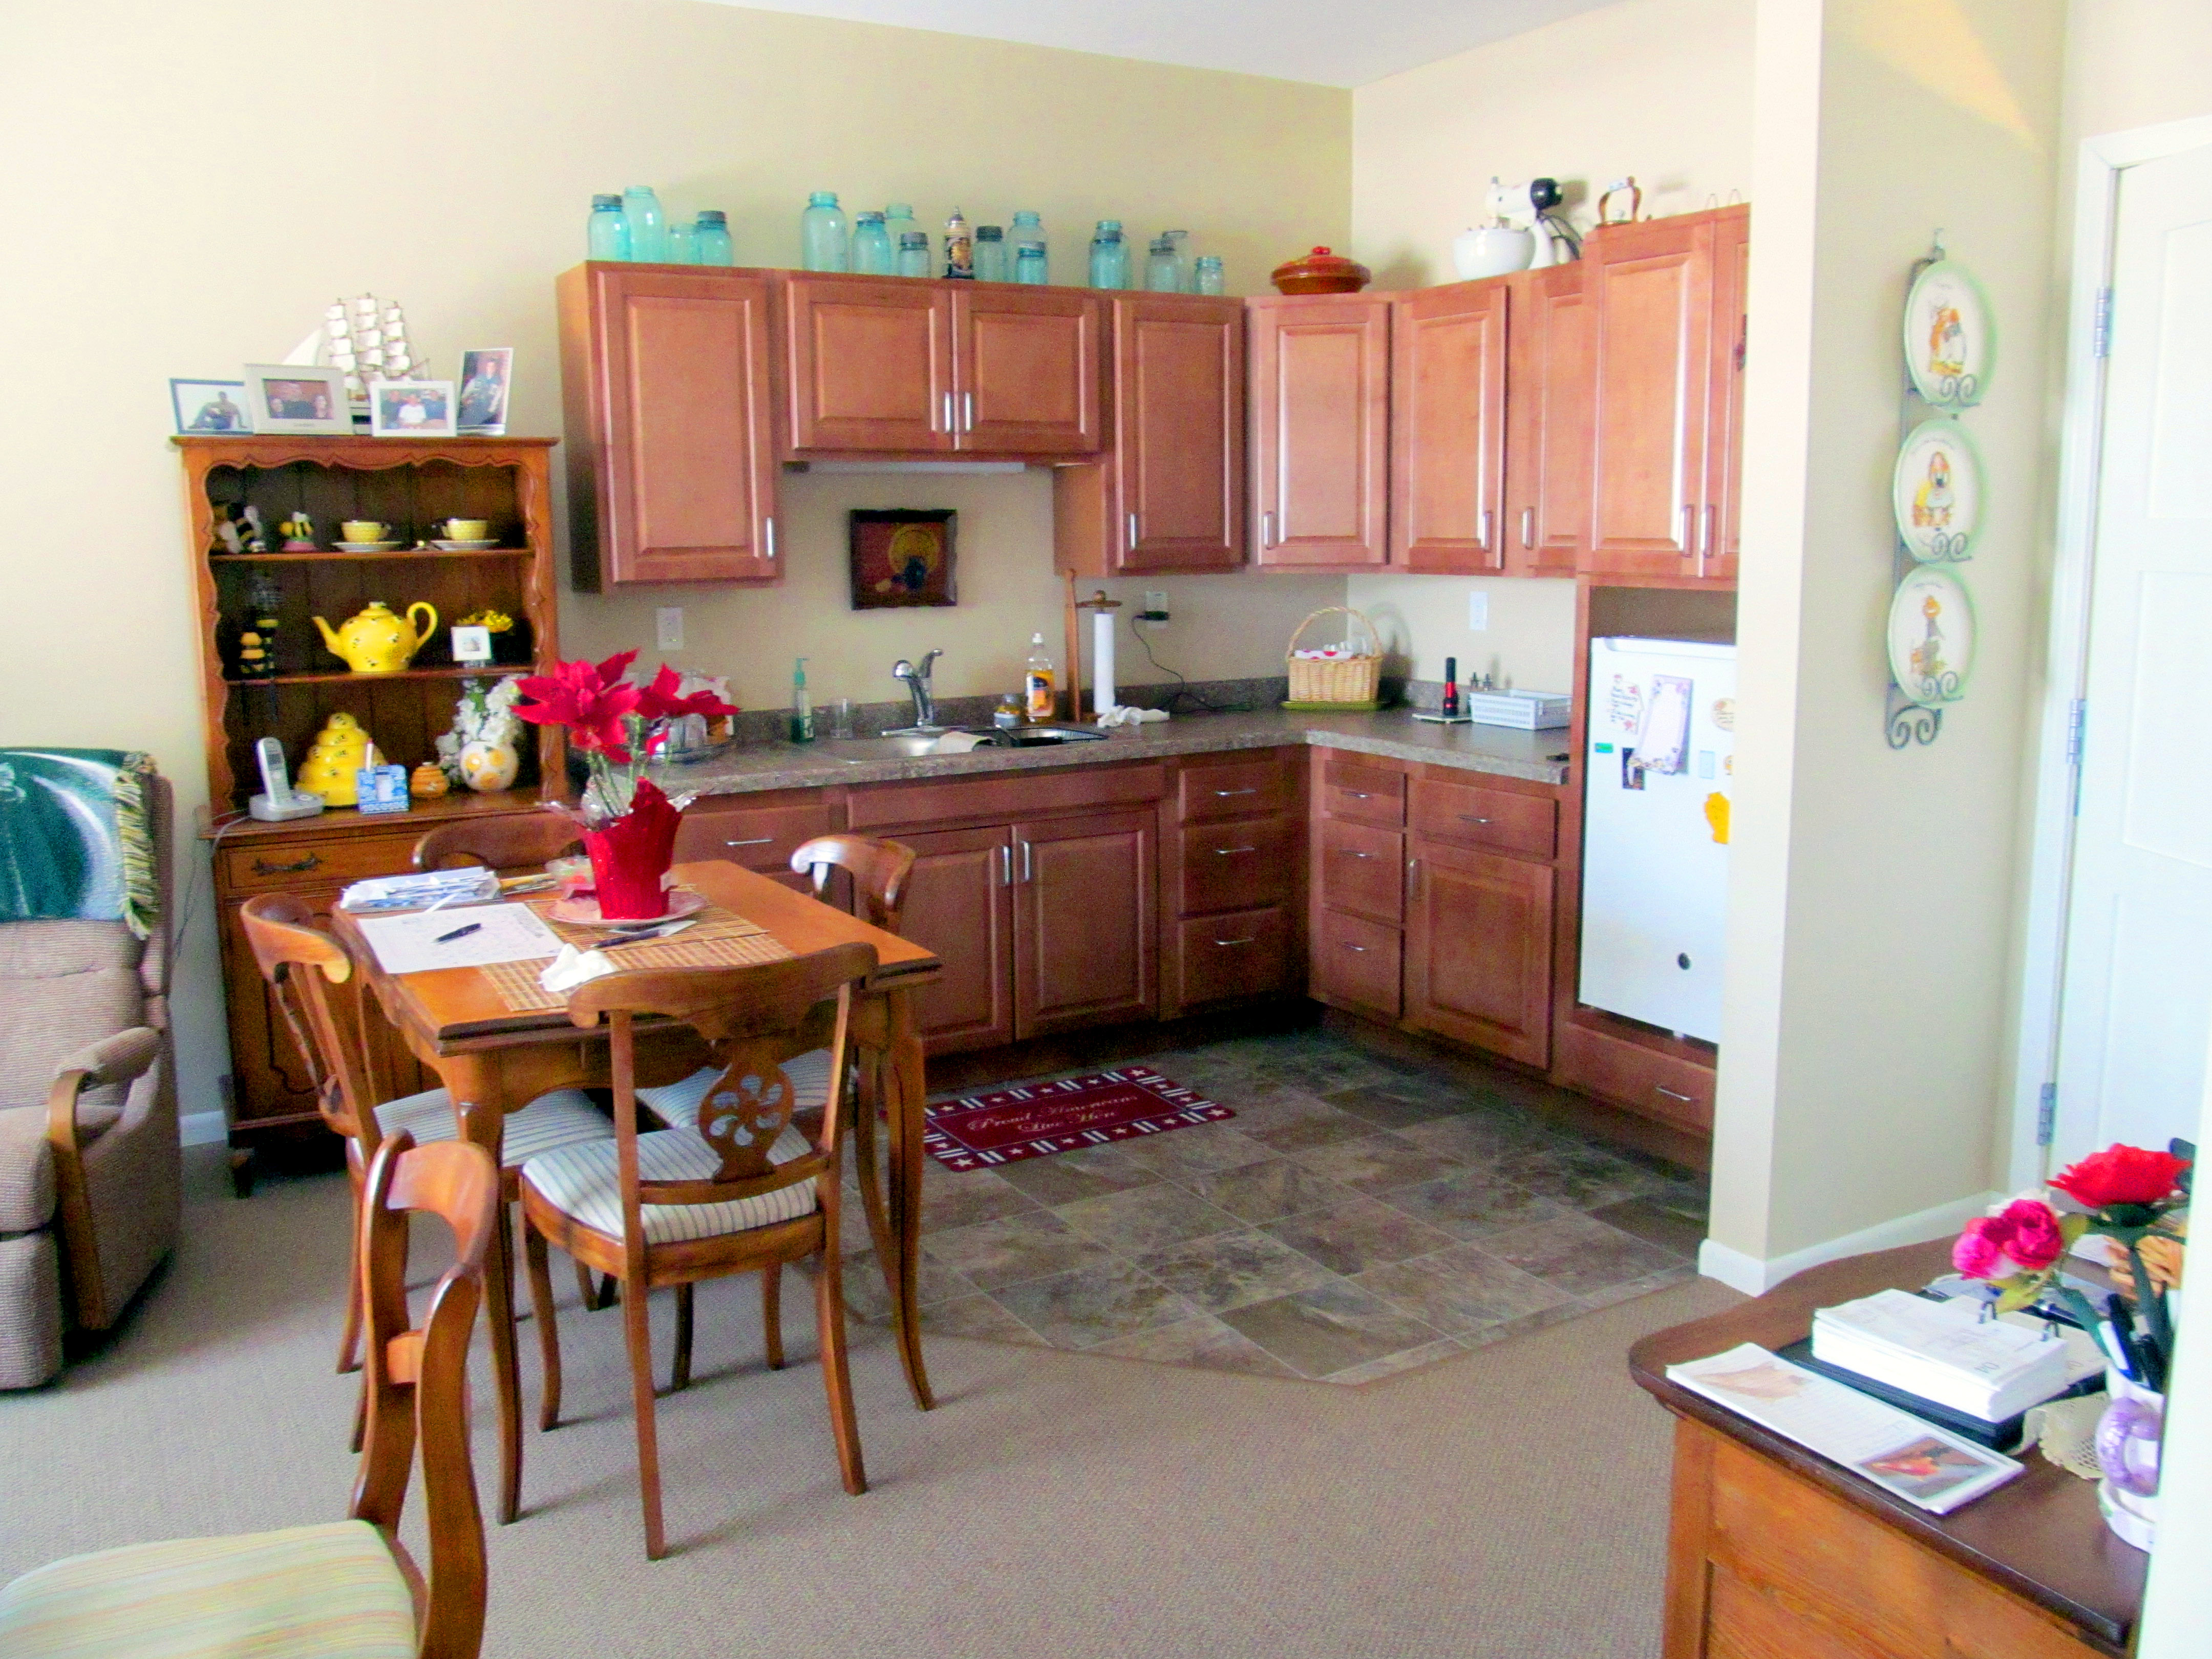 Cozy assisted living apartment kitchenette available at Good Samaritan Society - Scandia Village in Sister Bay, Wisconsin.